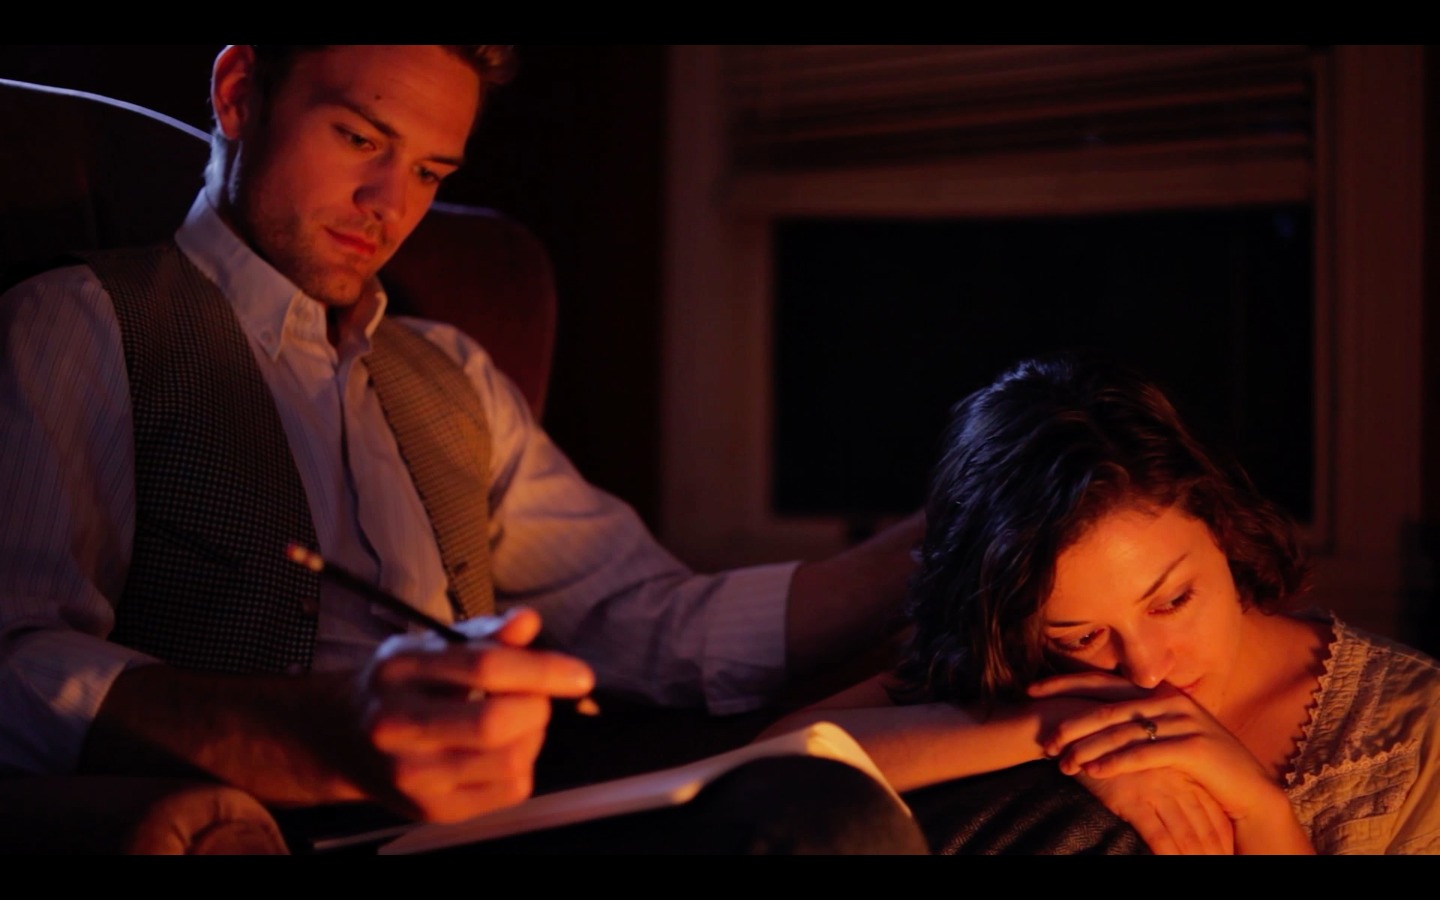 Production still from 'Fading' a short written and directed by Michelle Musser.